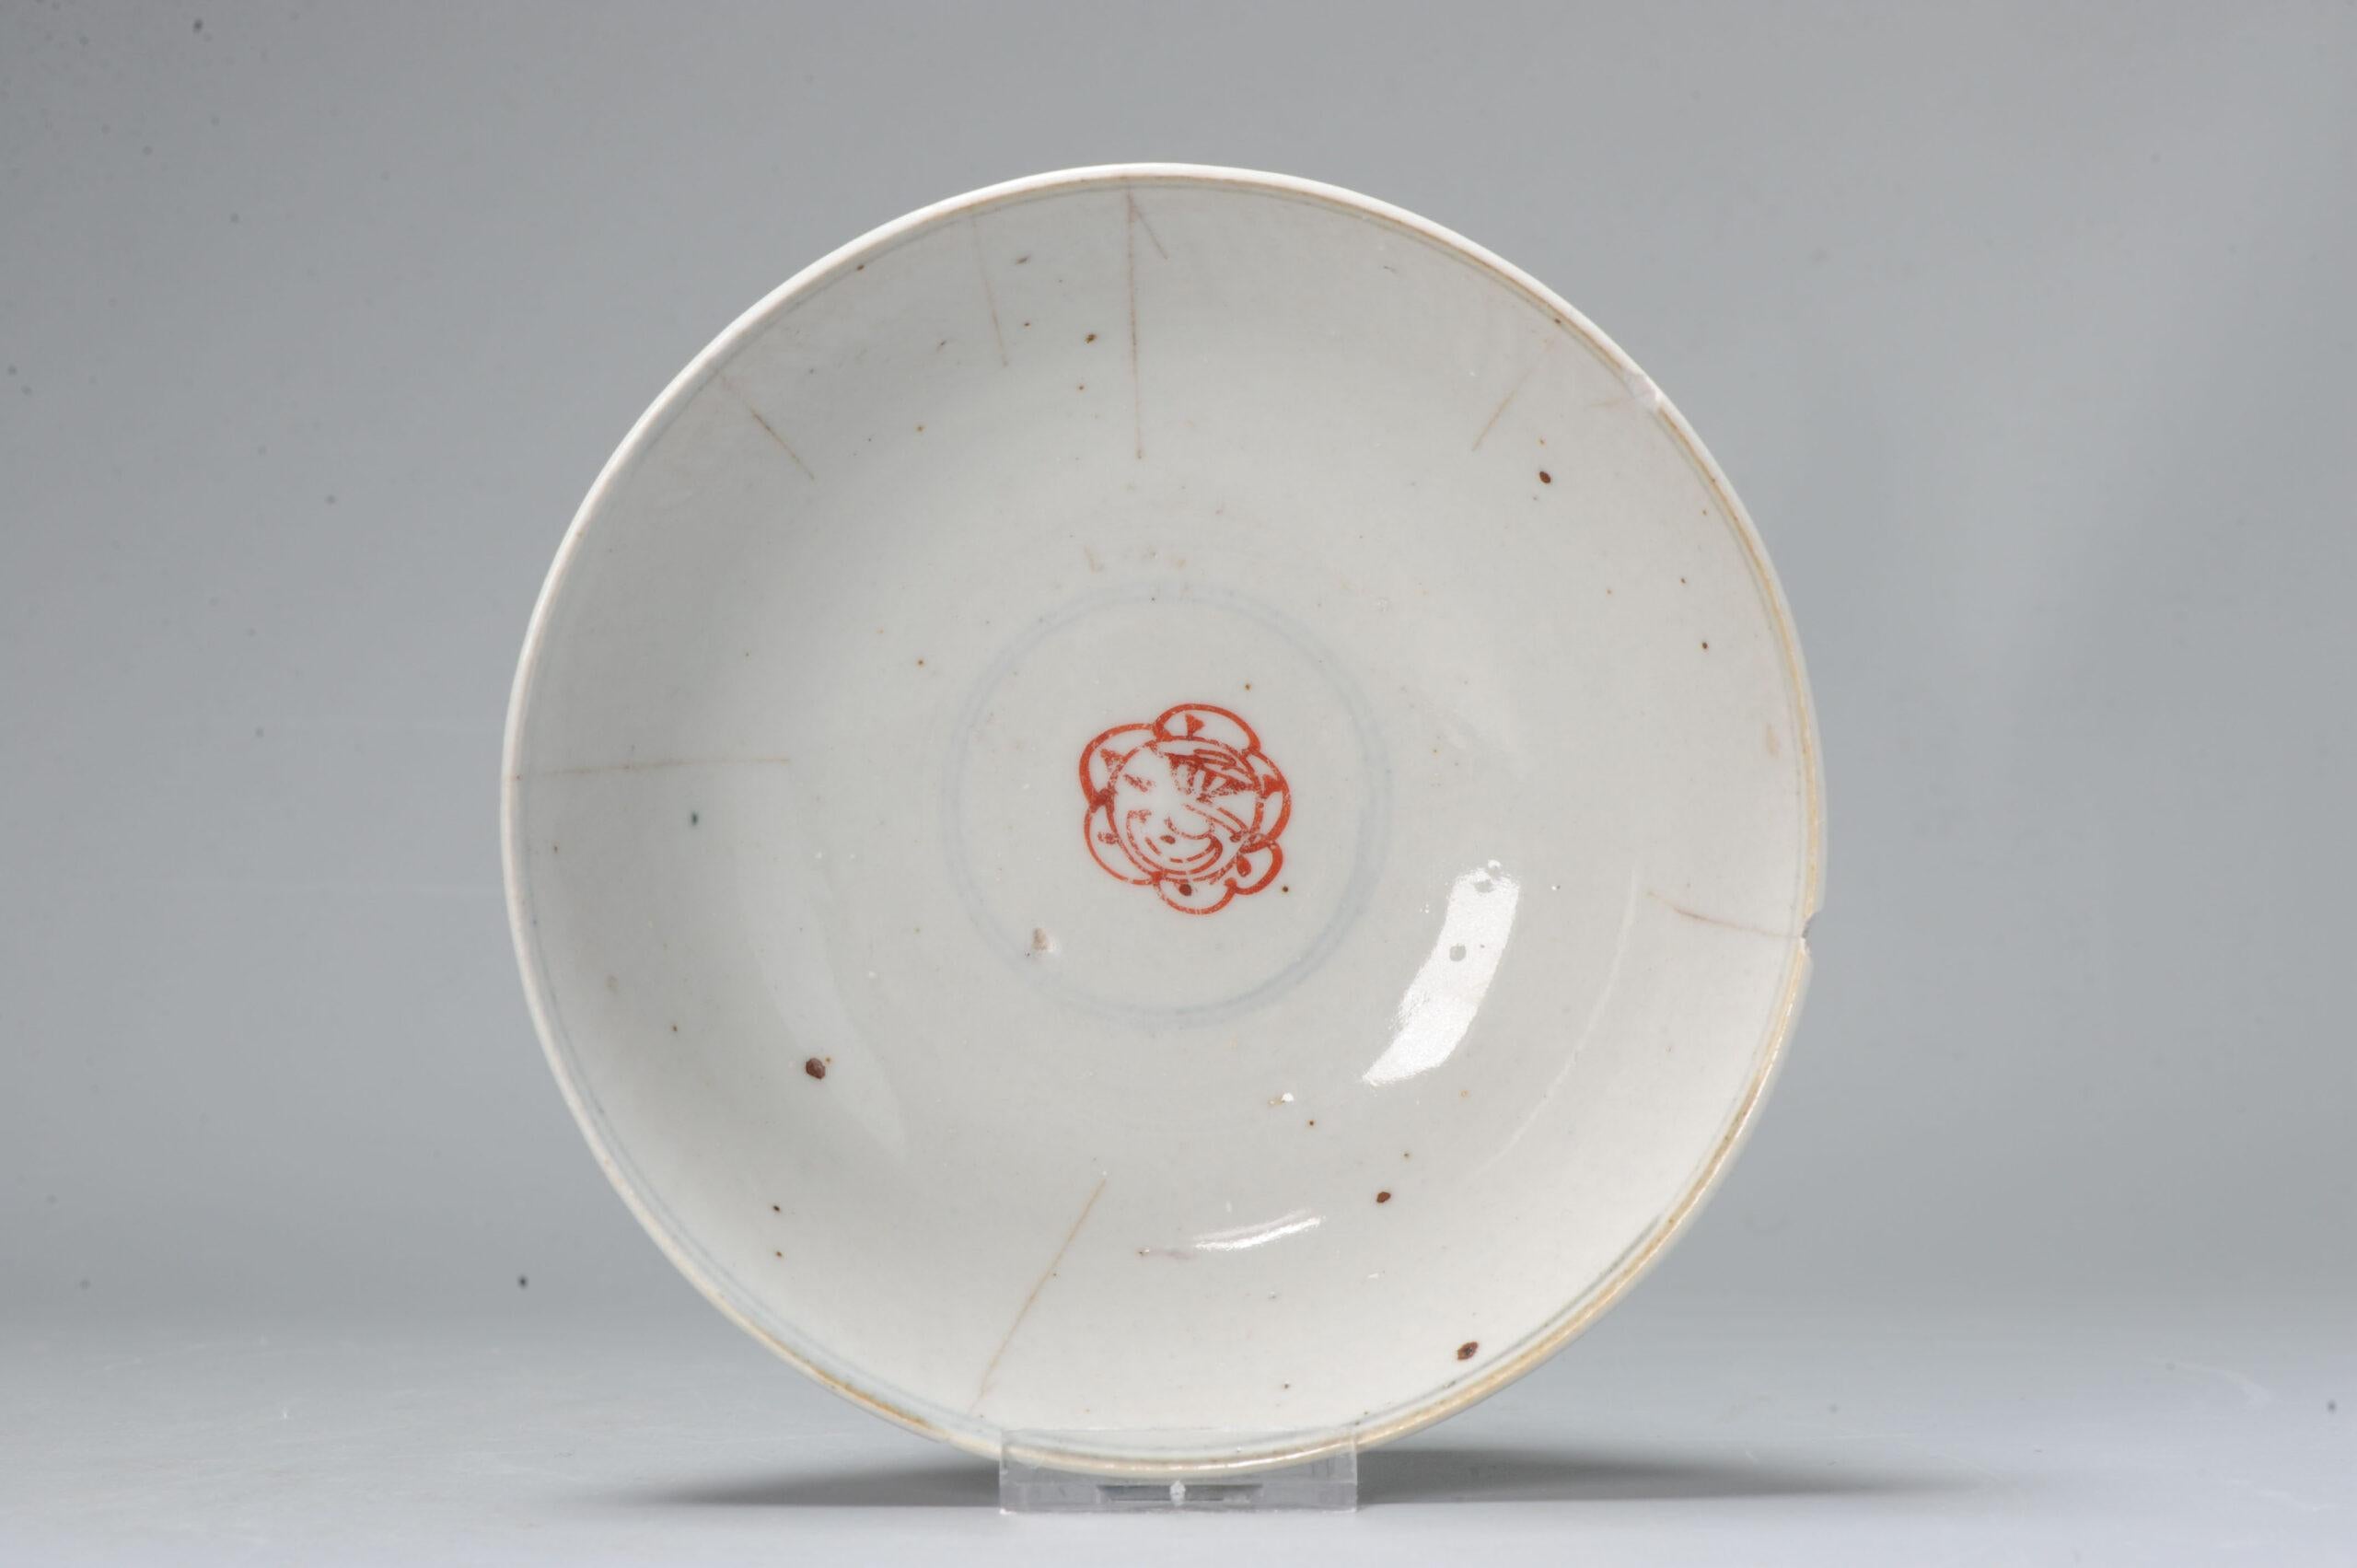 Chinese Porcelain Peach Bat Symbol China Antique Kitchen Qing Bowl, 19 Century In Good Condition For Sale In Amsterdam, Noord Holland